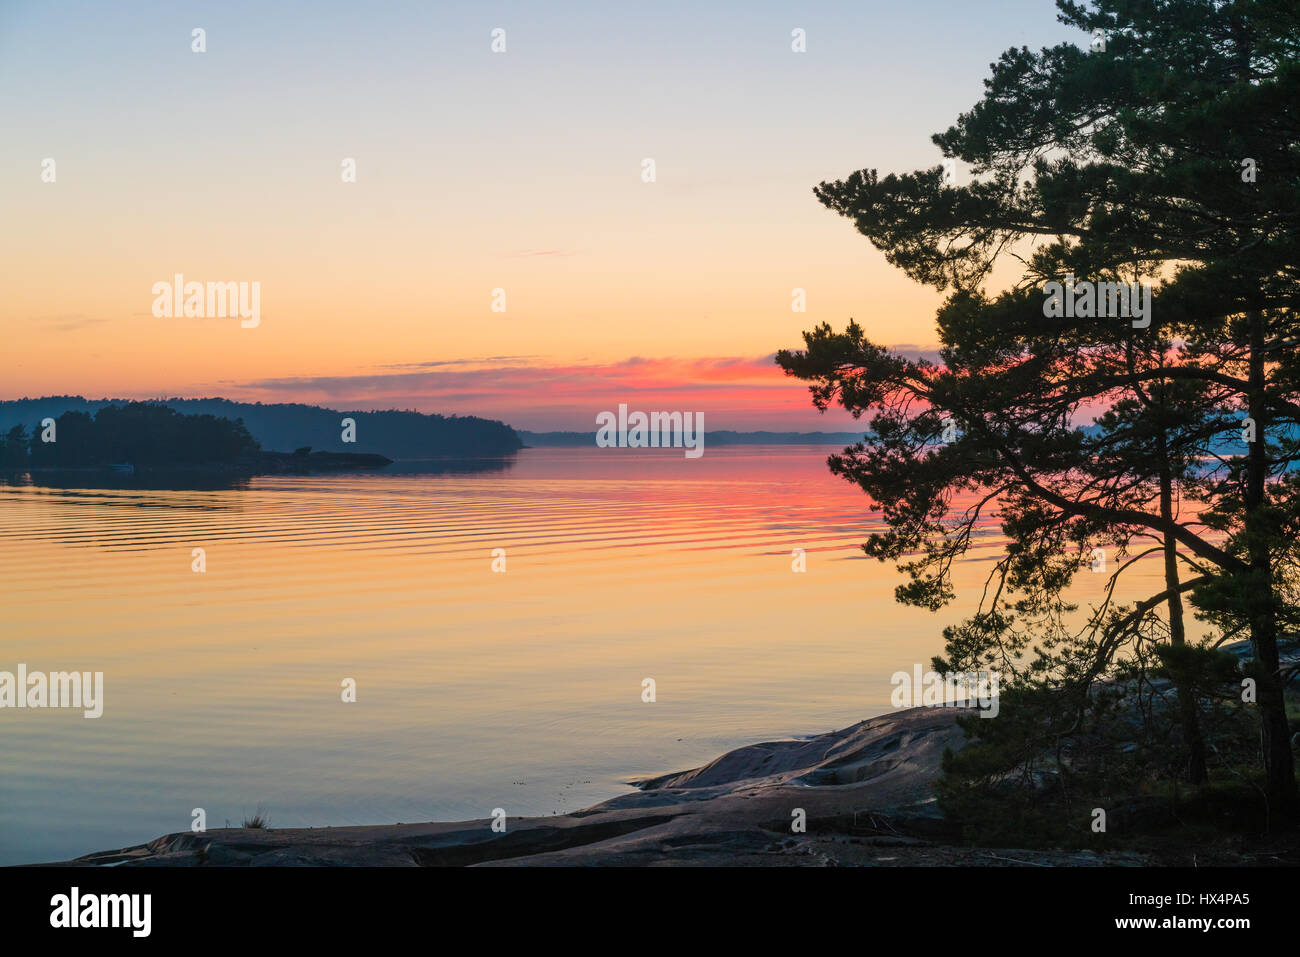 THE SWEDISH FINNISH ARCHIPELAGO IN THE BALTIC SEA AT SUNSET OR SUNRISE WITH RICH COLOURS AND AN ISLAND SILHOUETTED IN THE FOREGROUND Stock Photo